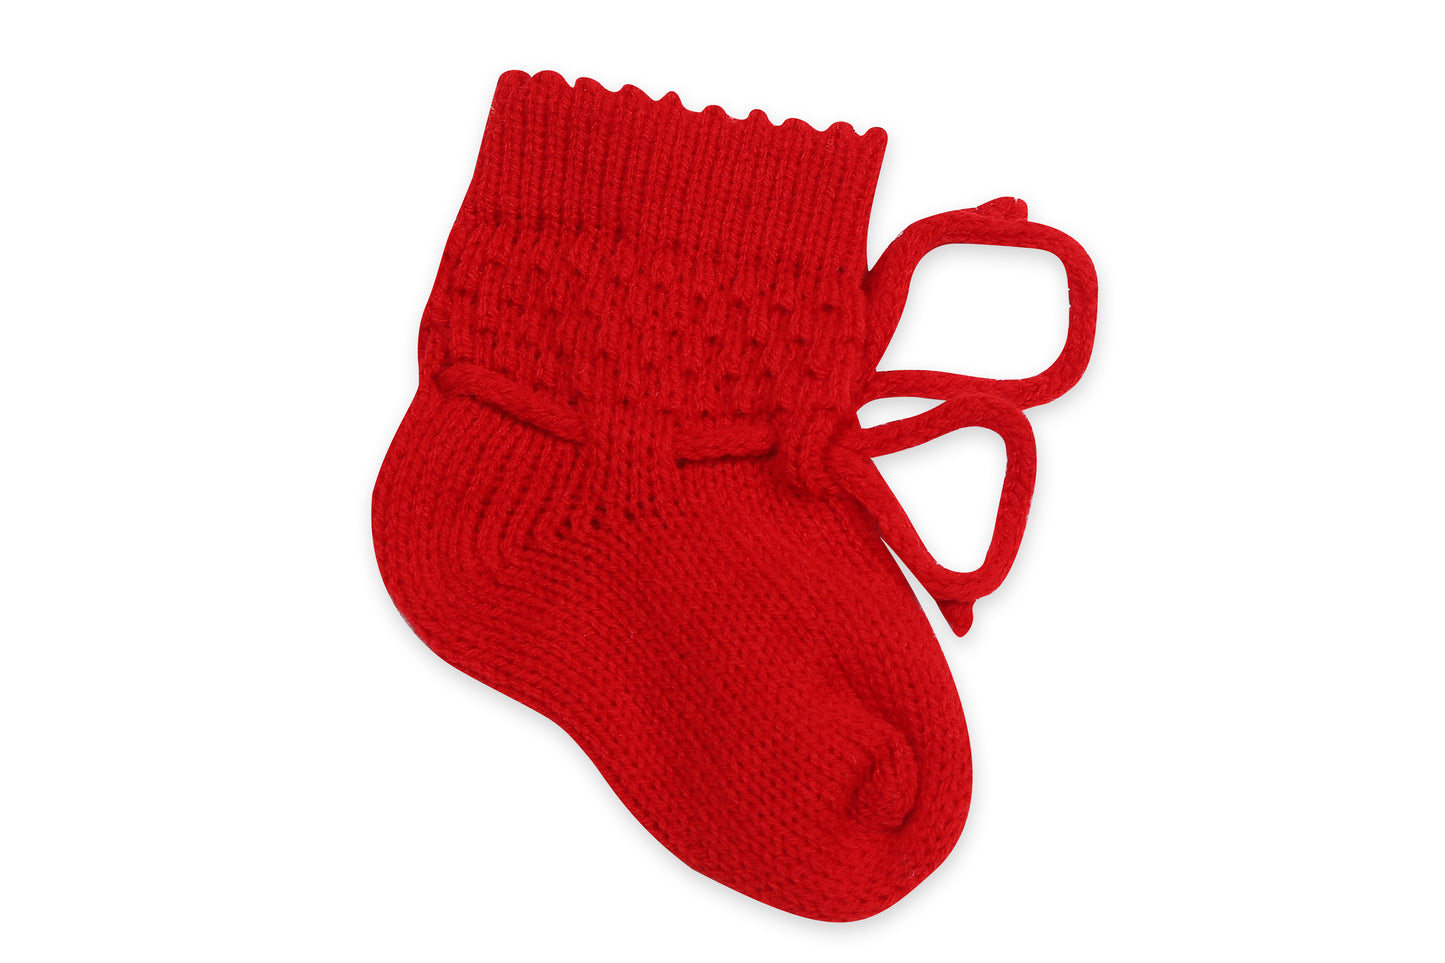 Baby Knitted Sweater, Leggings, Cap & Booties Full Suit (4 Pcs) Red